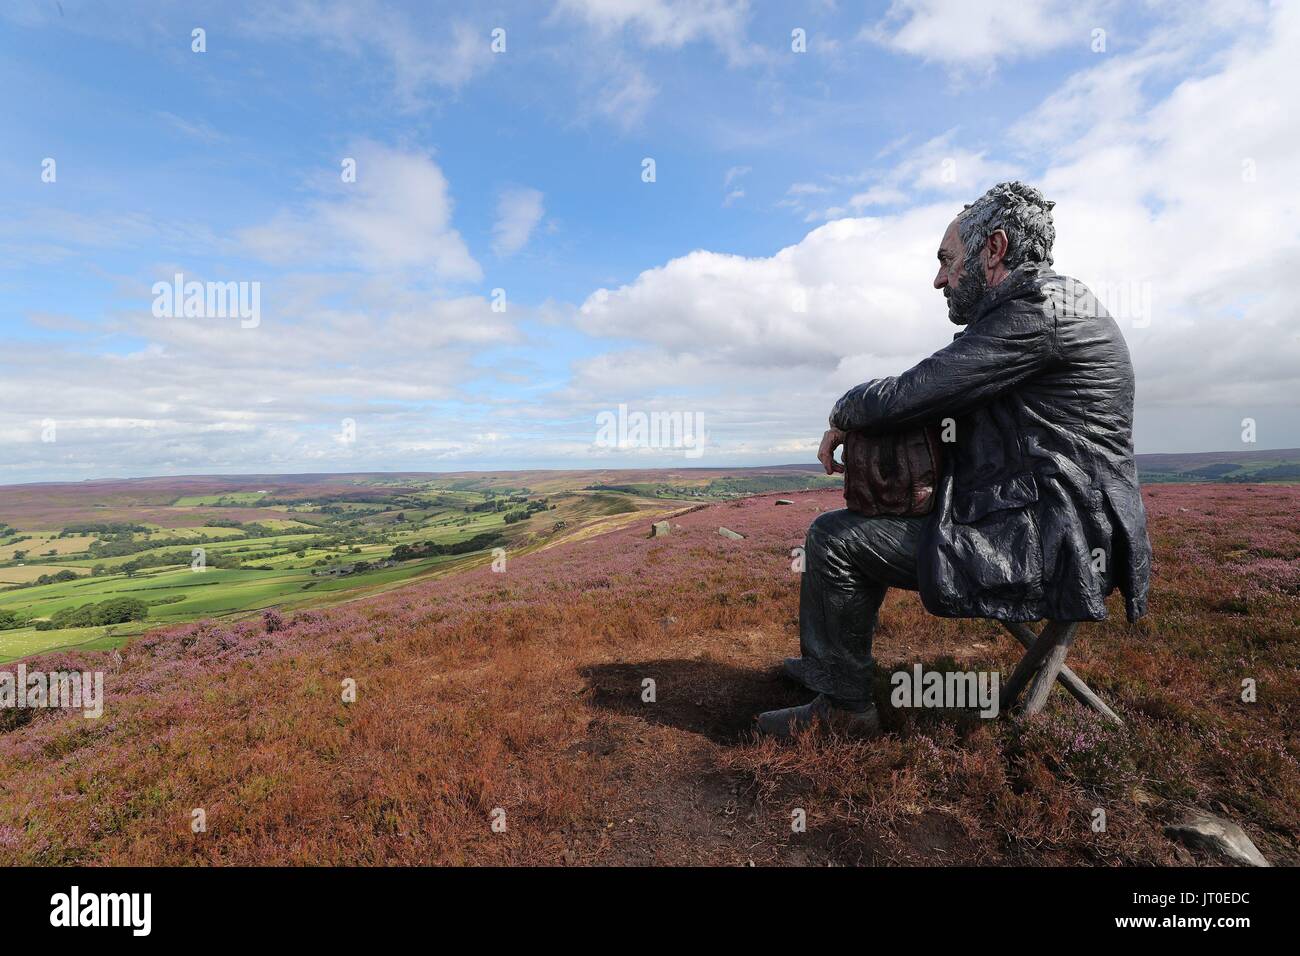 The Seated Man, a 3 meter sculpture by Sean Henry, at Castleton Rigg, near Westerdale in the North York Moors National Park. Stock Photo